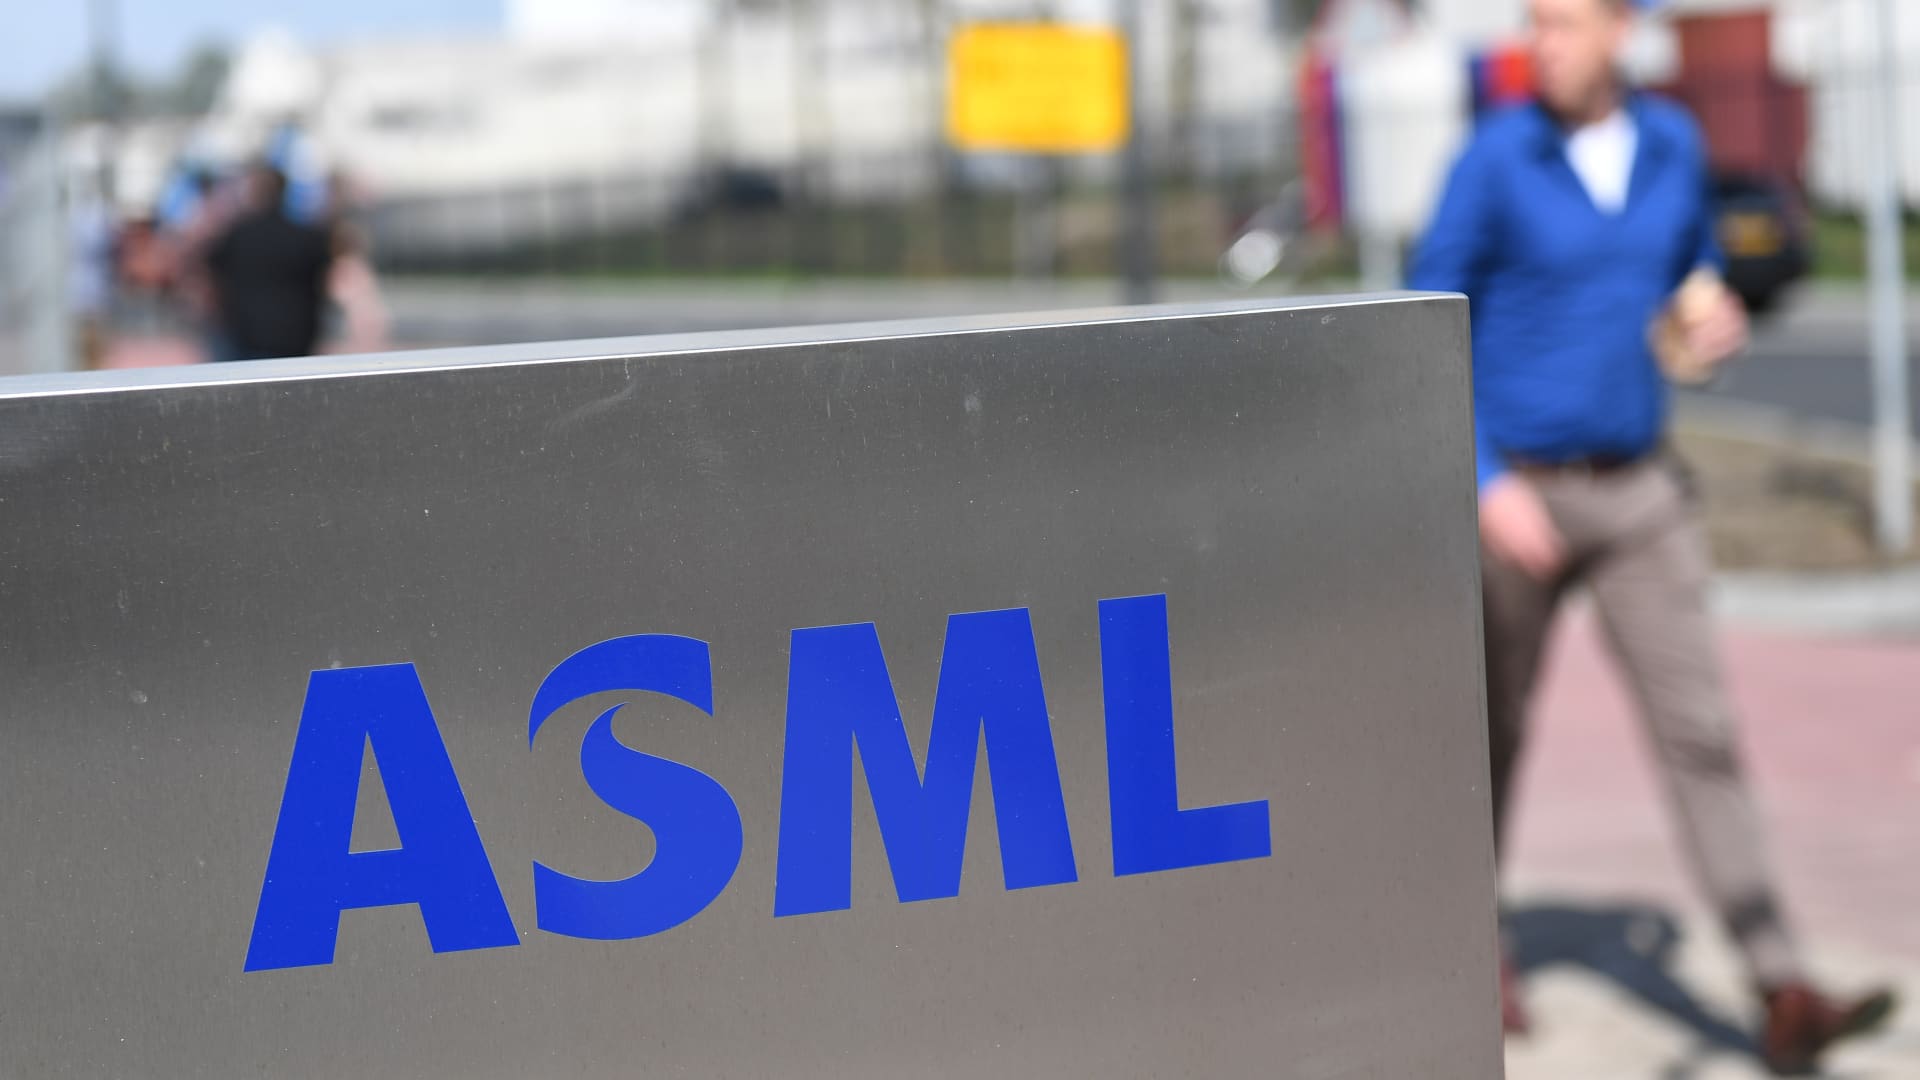 Critical chip firm ASML posts profit beat but sales miss expectations with 22% drop | MuaneToraya